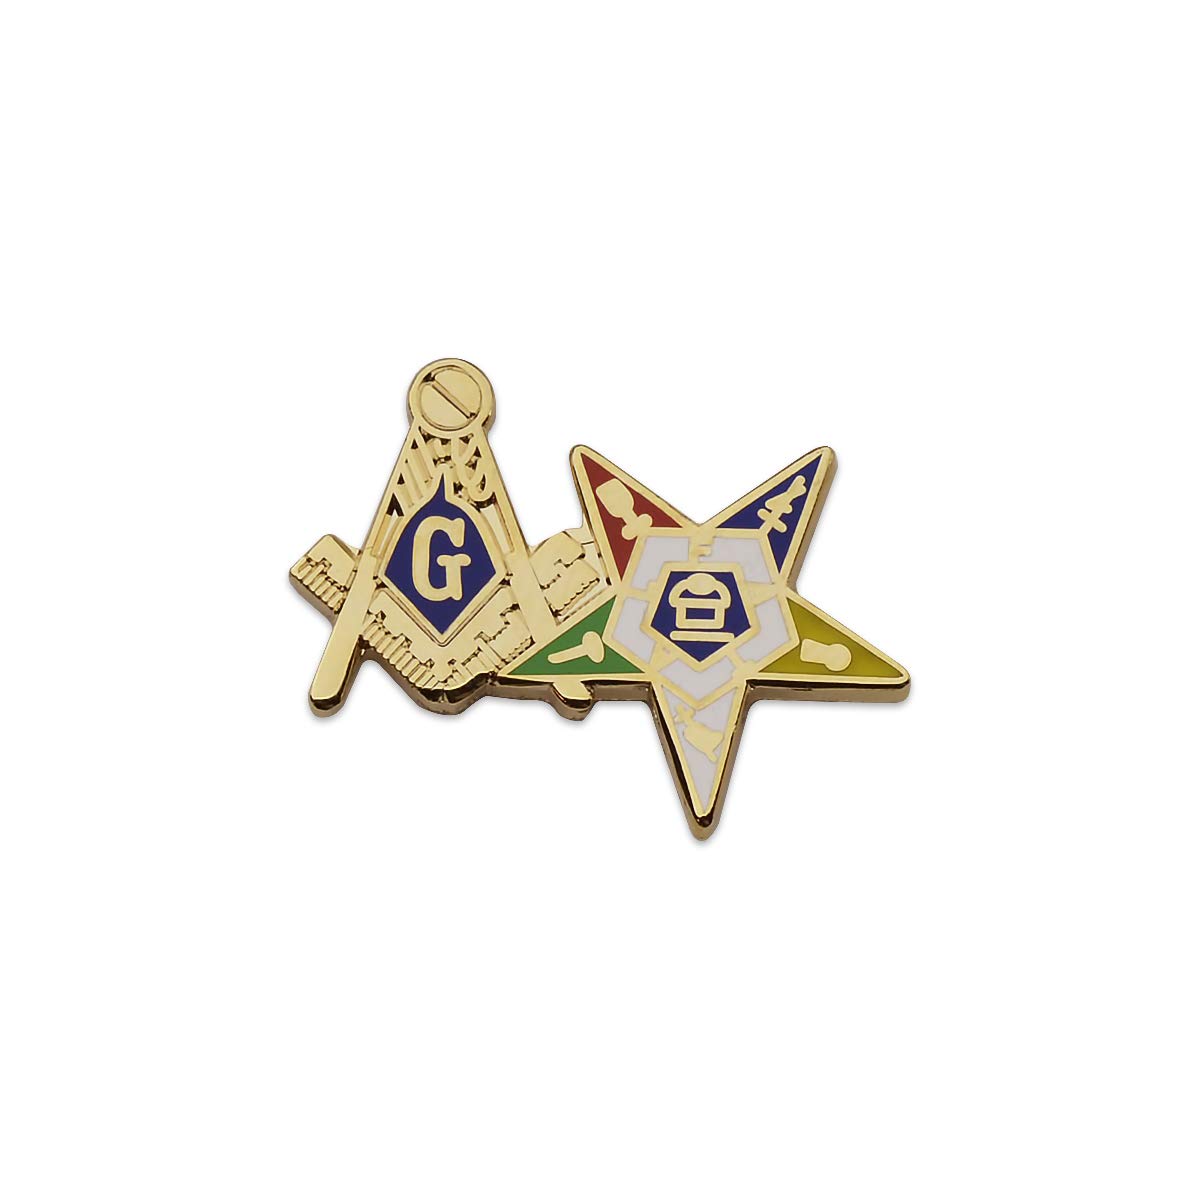 Square & Compass and Order of The Eastern Star Masonic Lapel Pin - [Gold & Blue][1'' Wide]